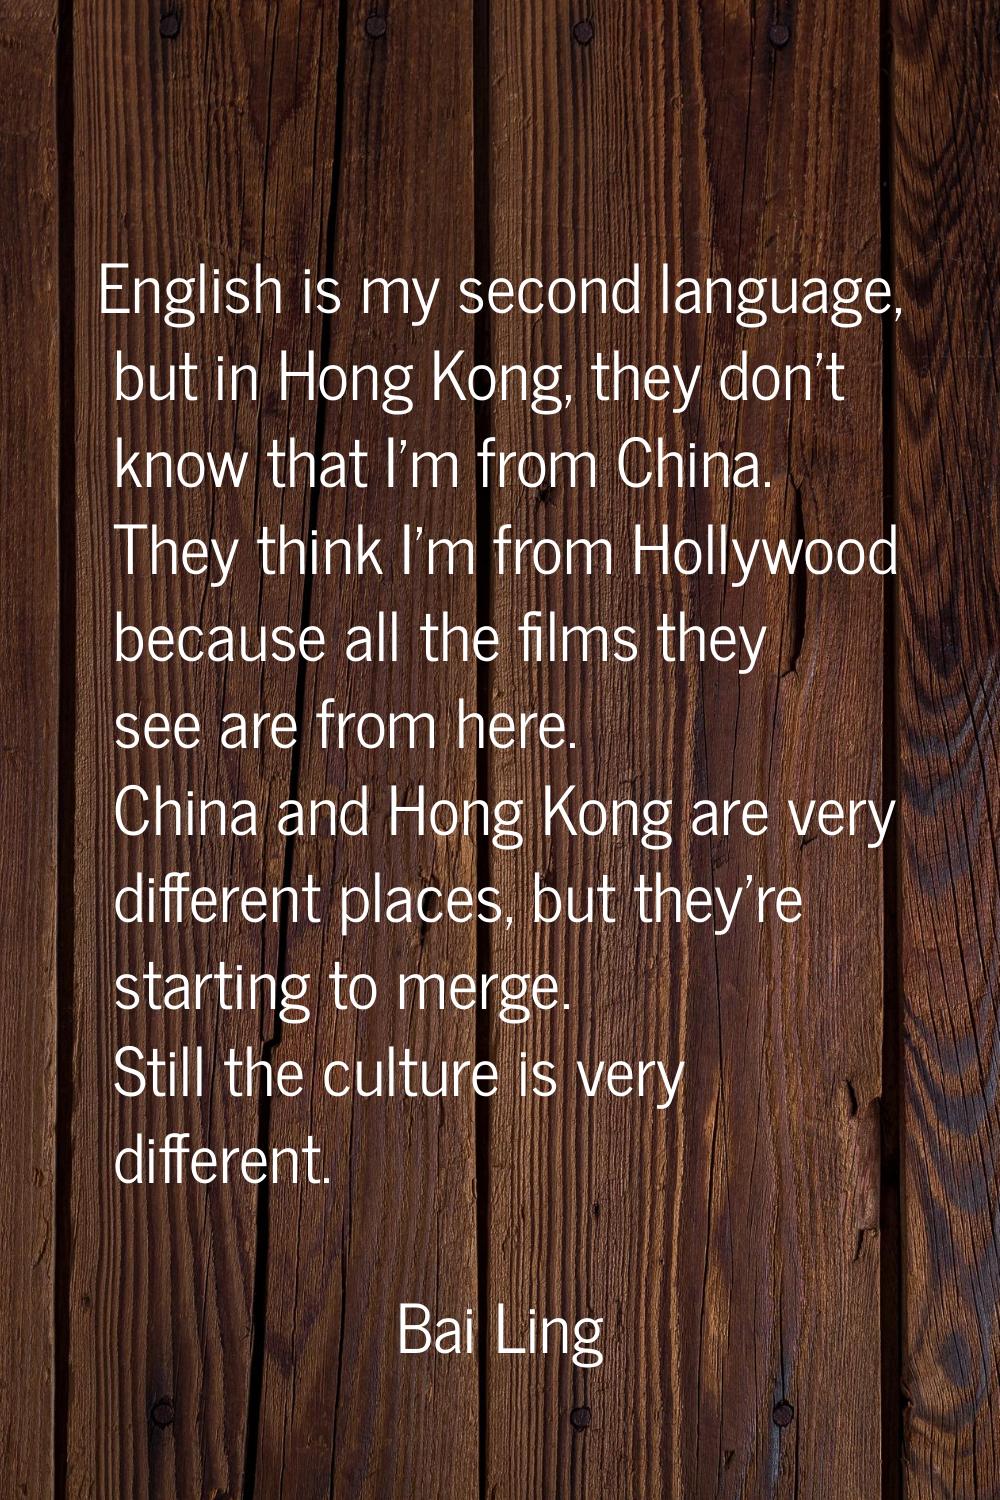 English is my second language, but in Hong Kong, they don't know that I'm from China. They think I'